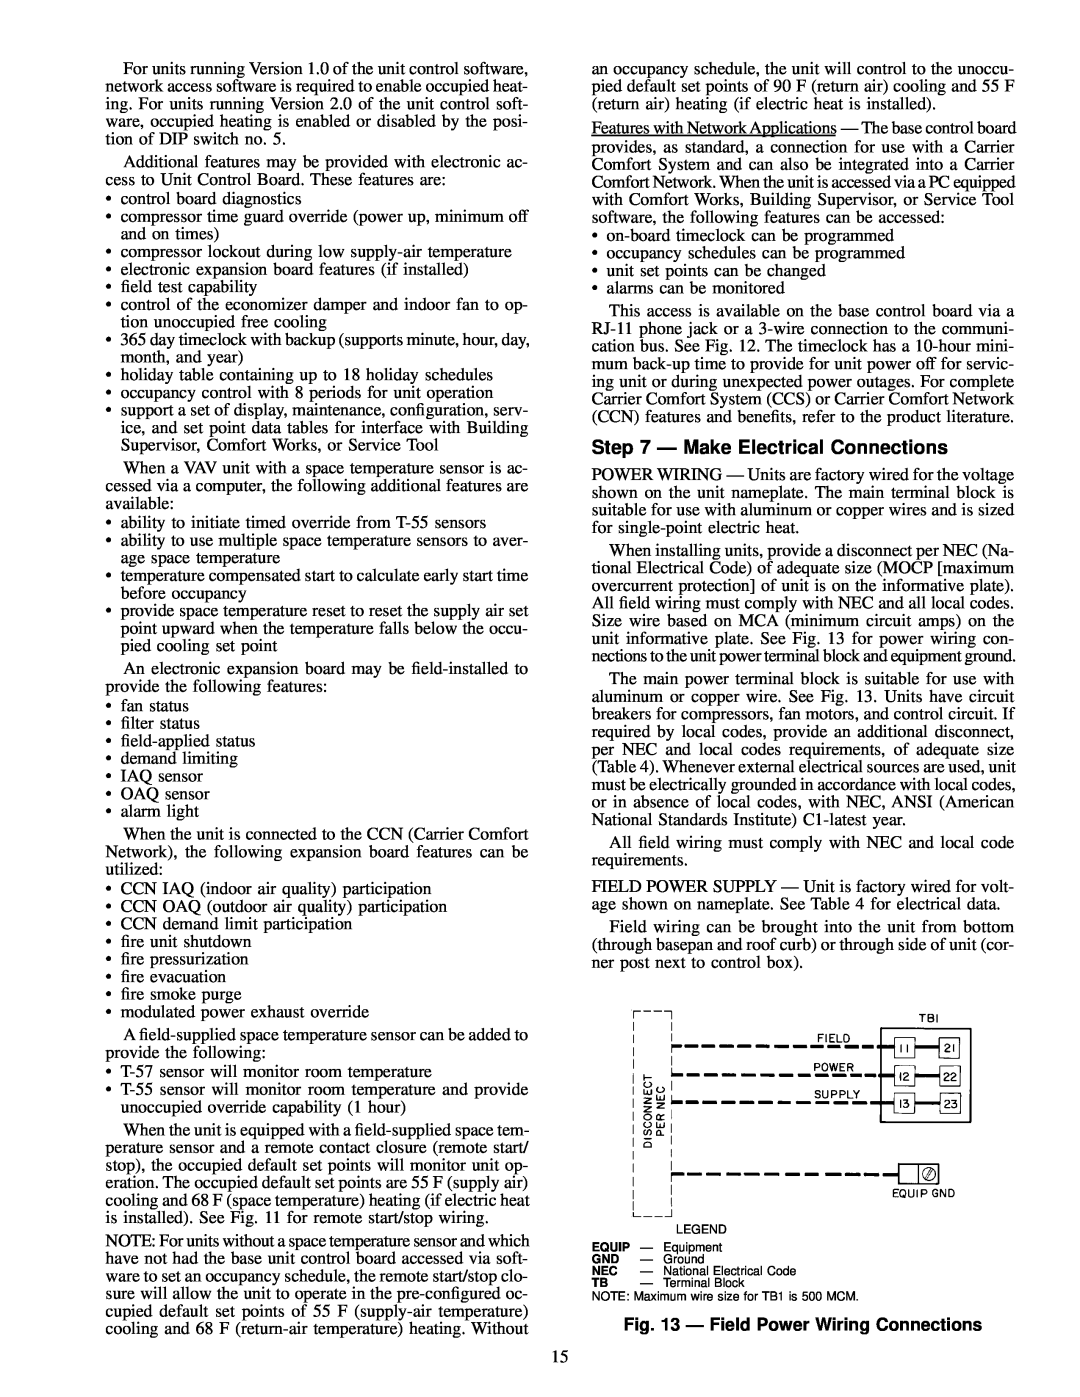 Carrier 50EK, 50EJ, 50EW, 50EY installation instructions Ð Make Electrical Connections, Ð Field Power Wiring Connections 